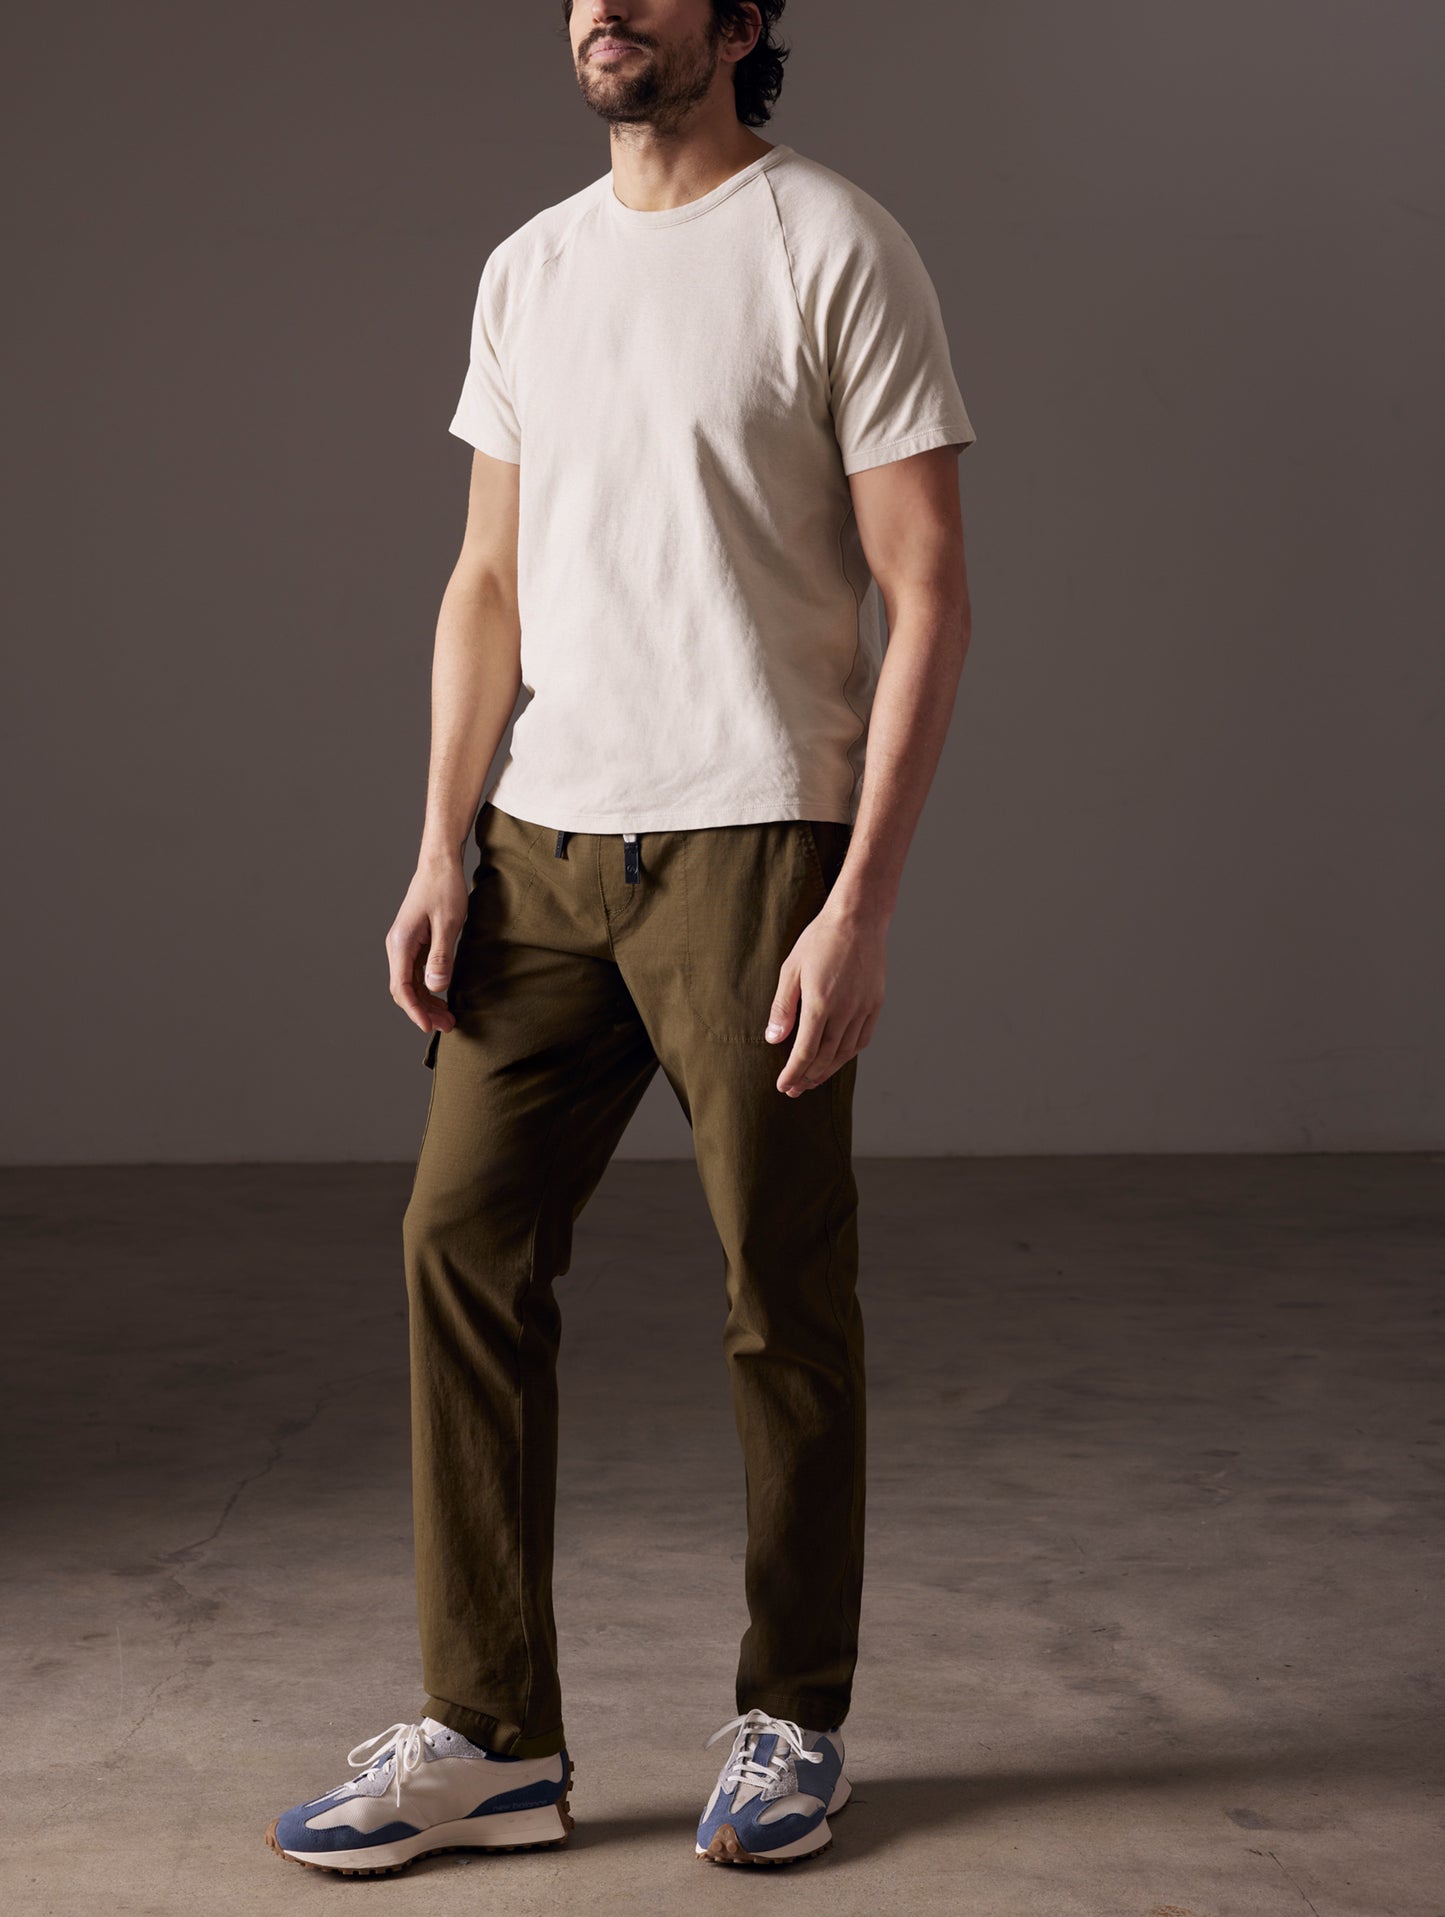 man wearing beige tee from AETHER Apparel